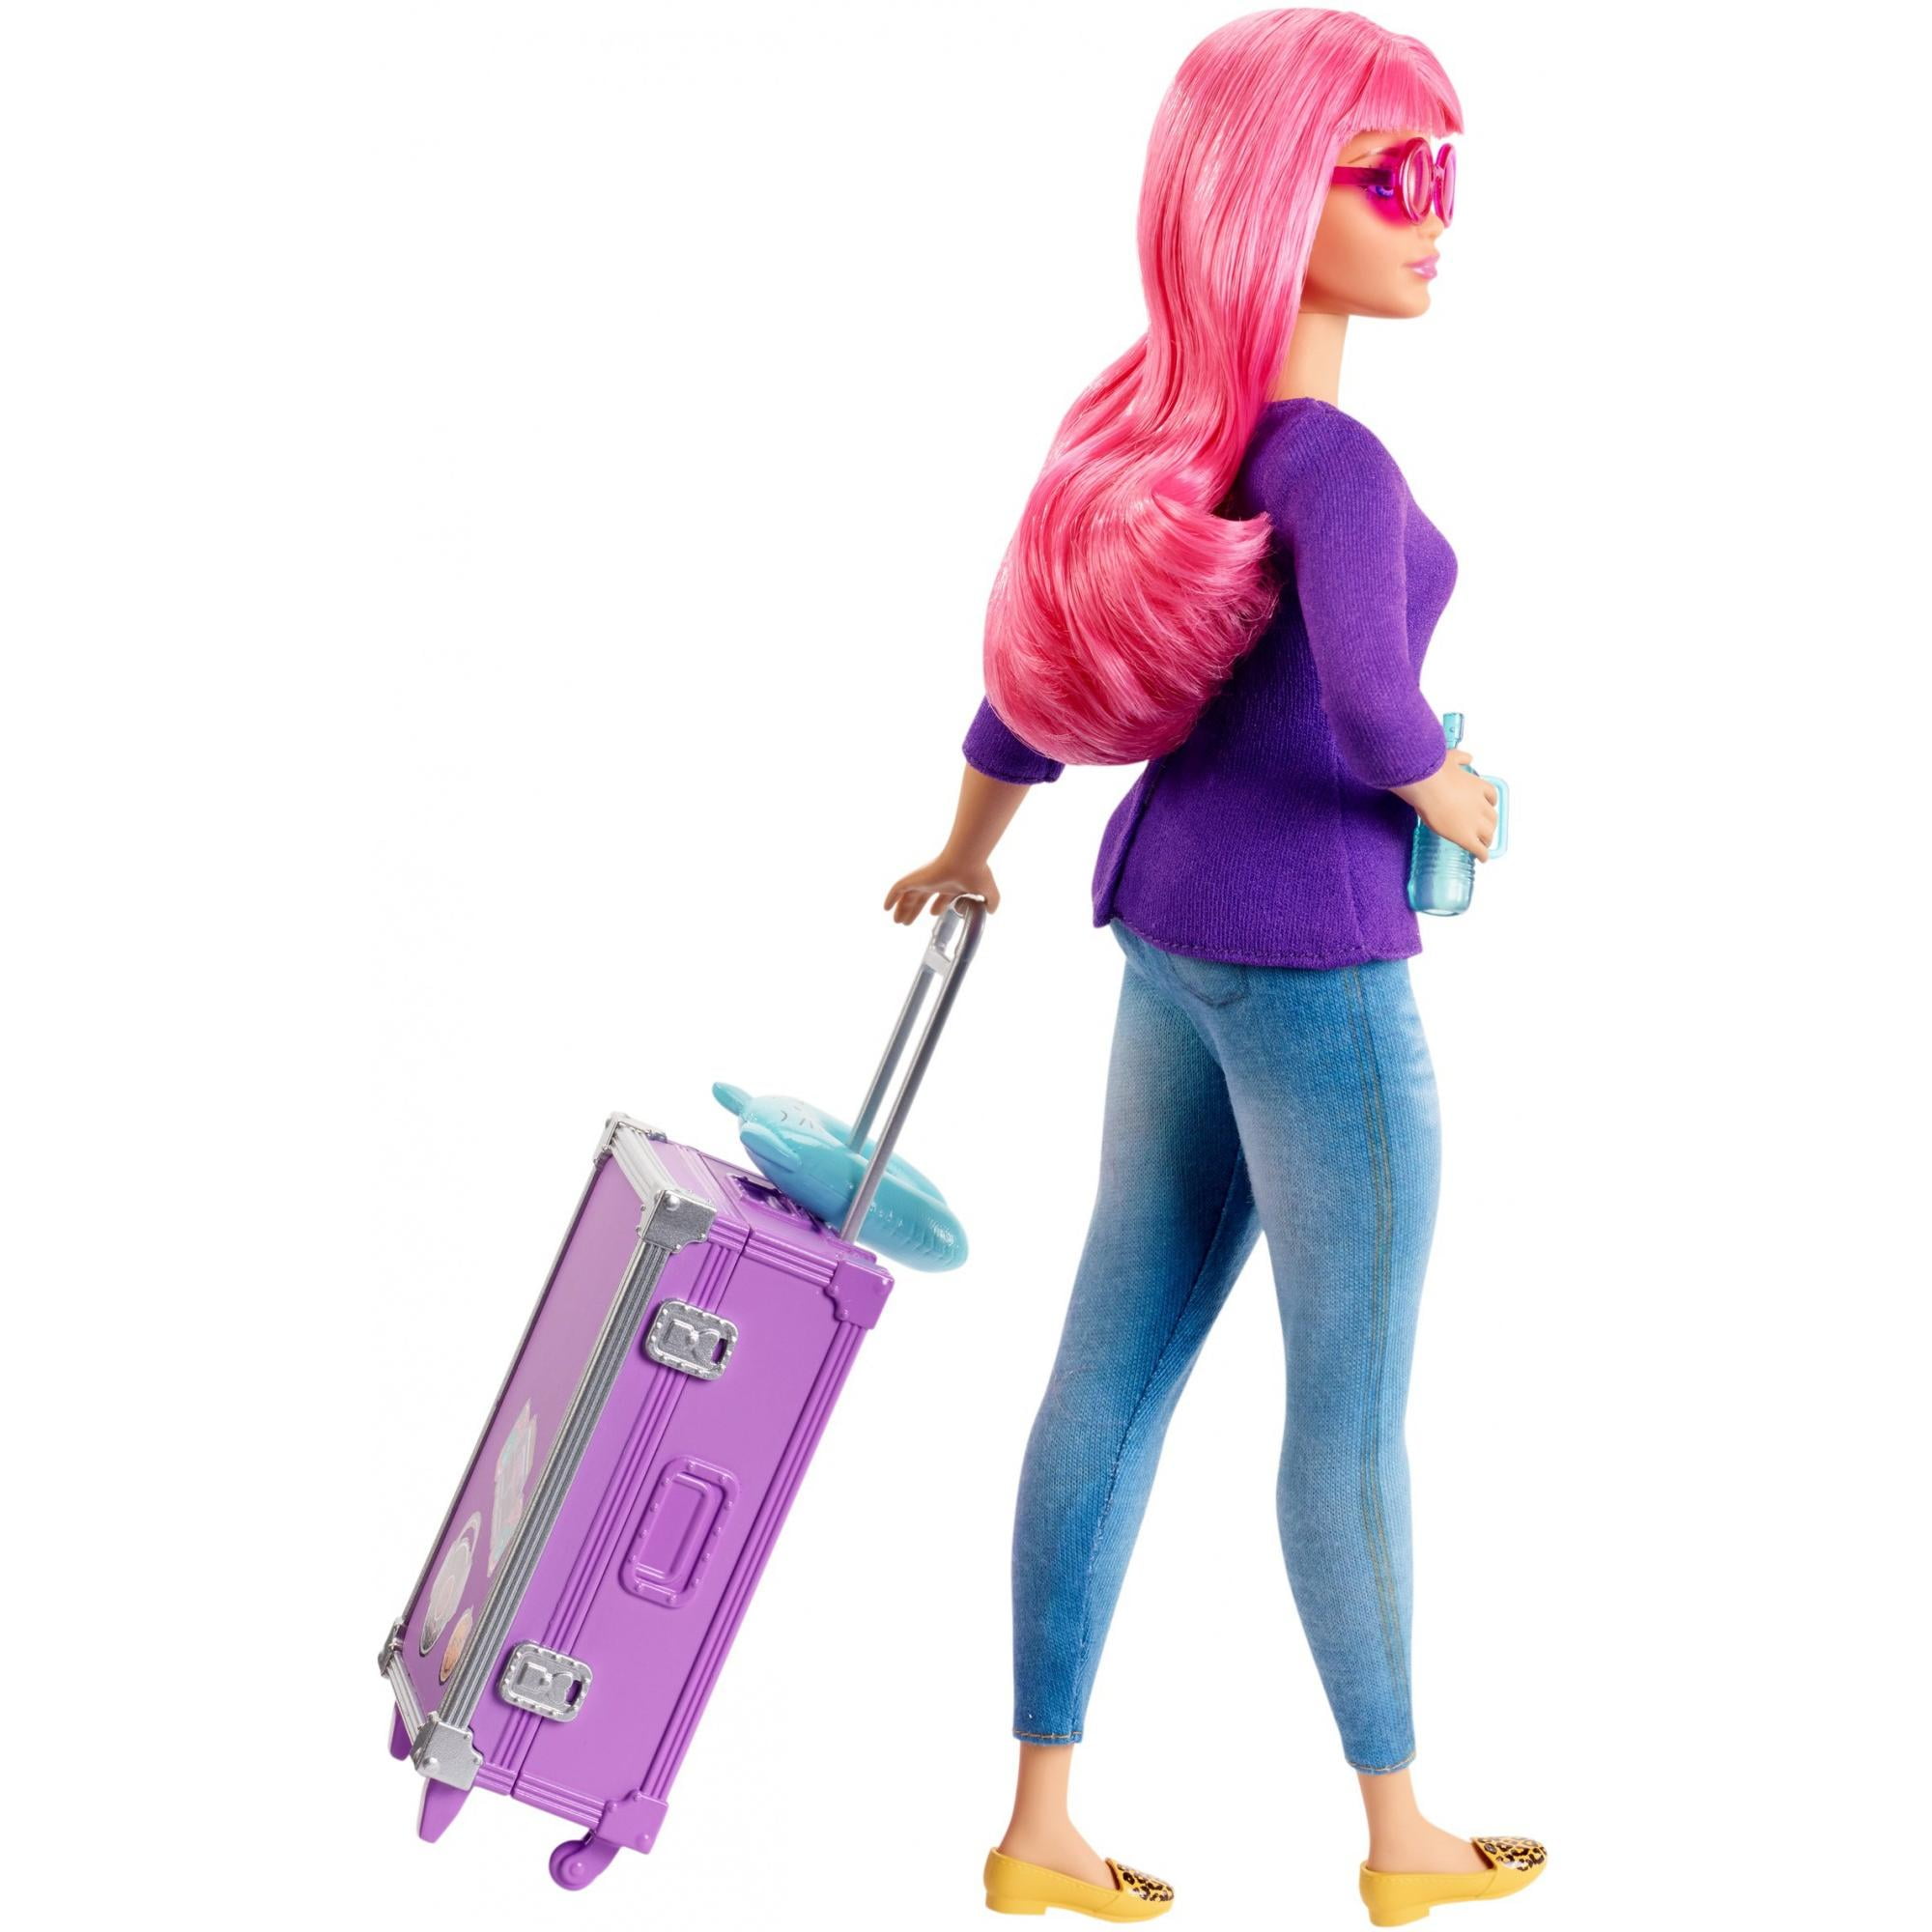 barbie daisy travel doll and accessories